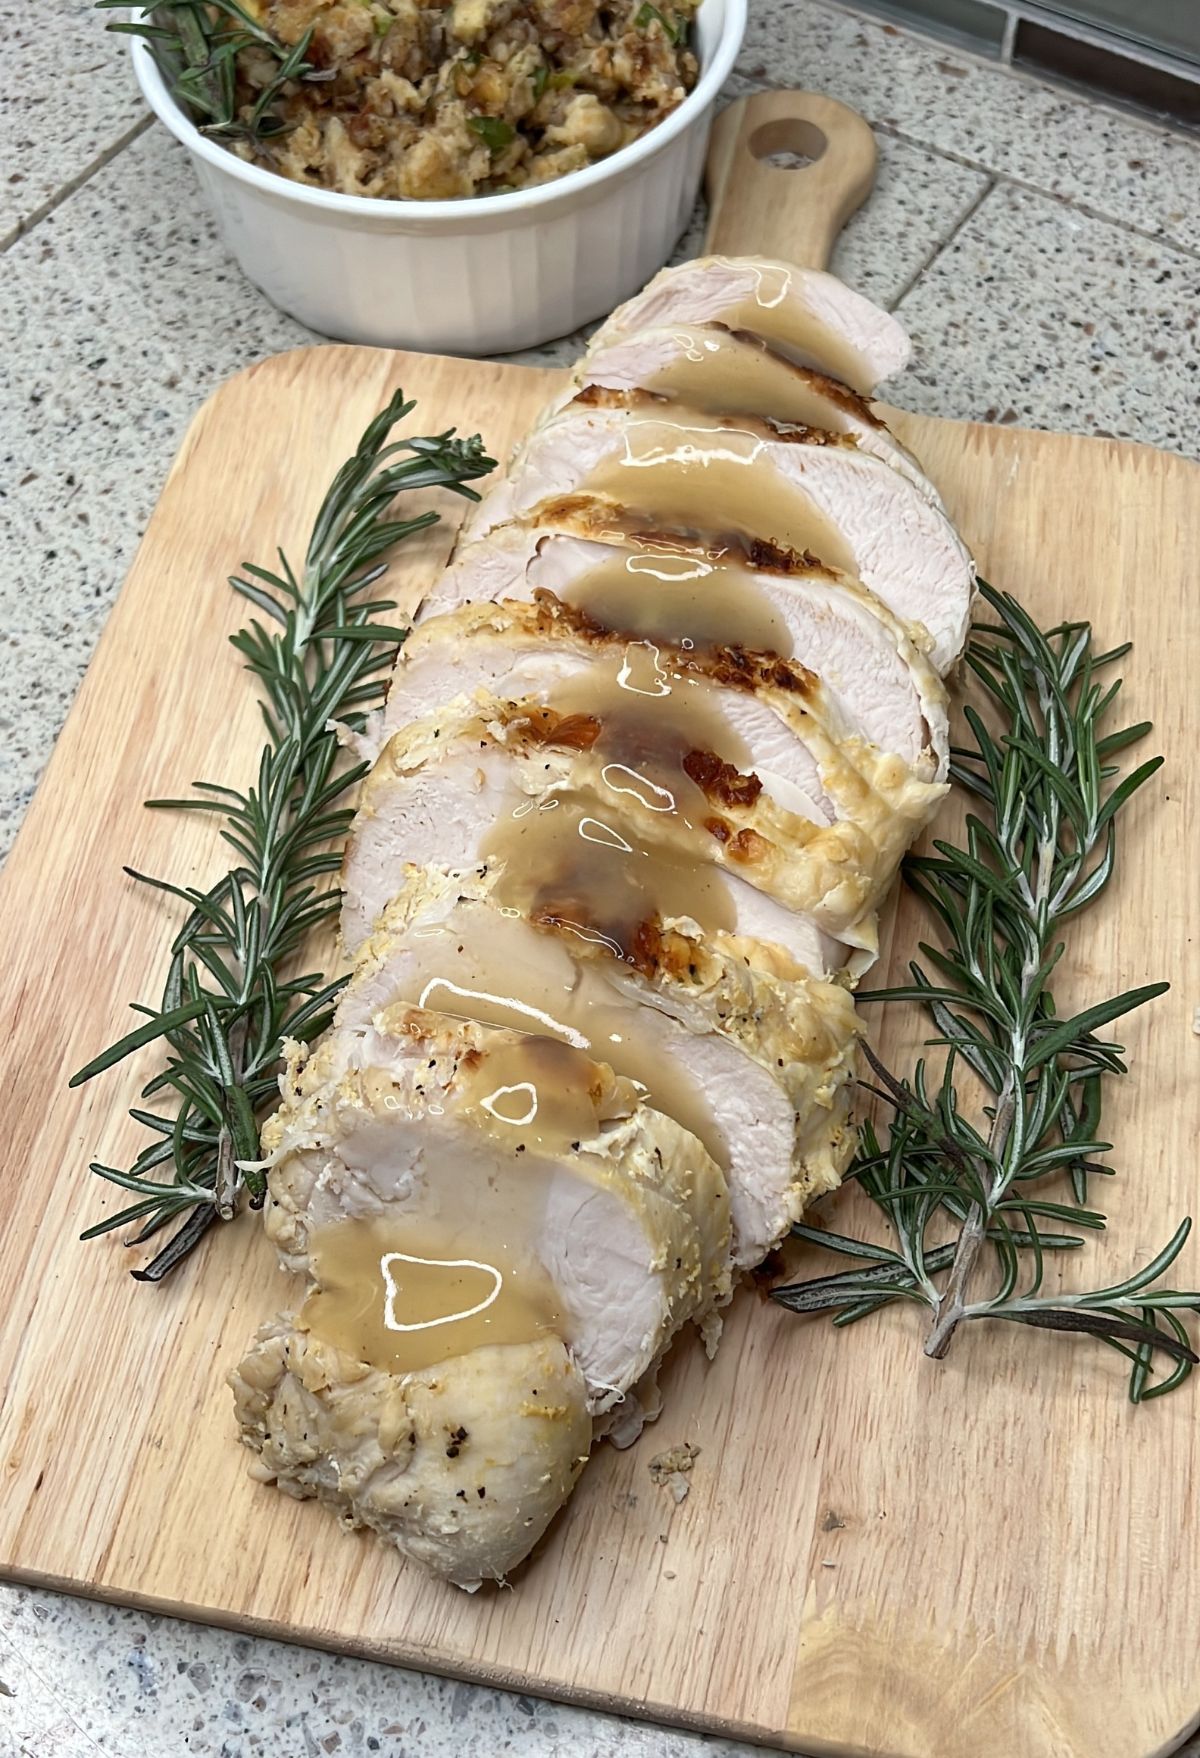 Sliced turkey with rosemary and stuffing on a cutting board.